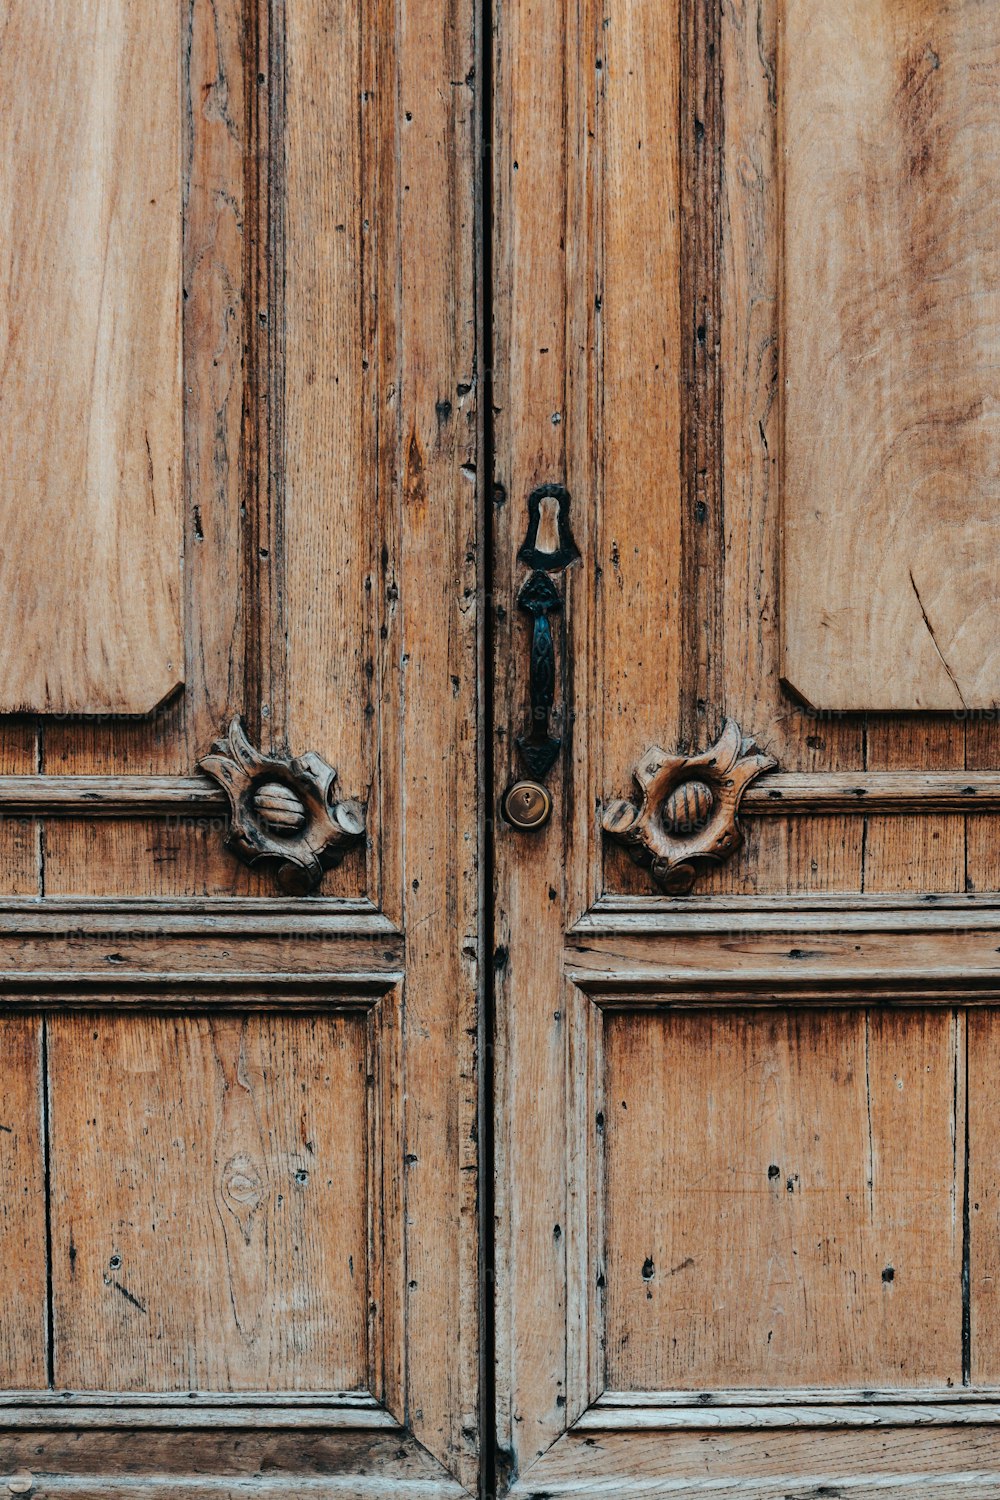 a close up of two wooden doors with metal handles